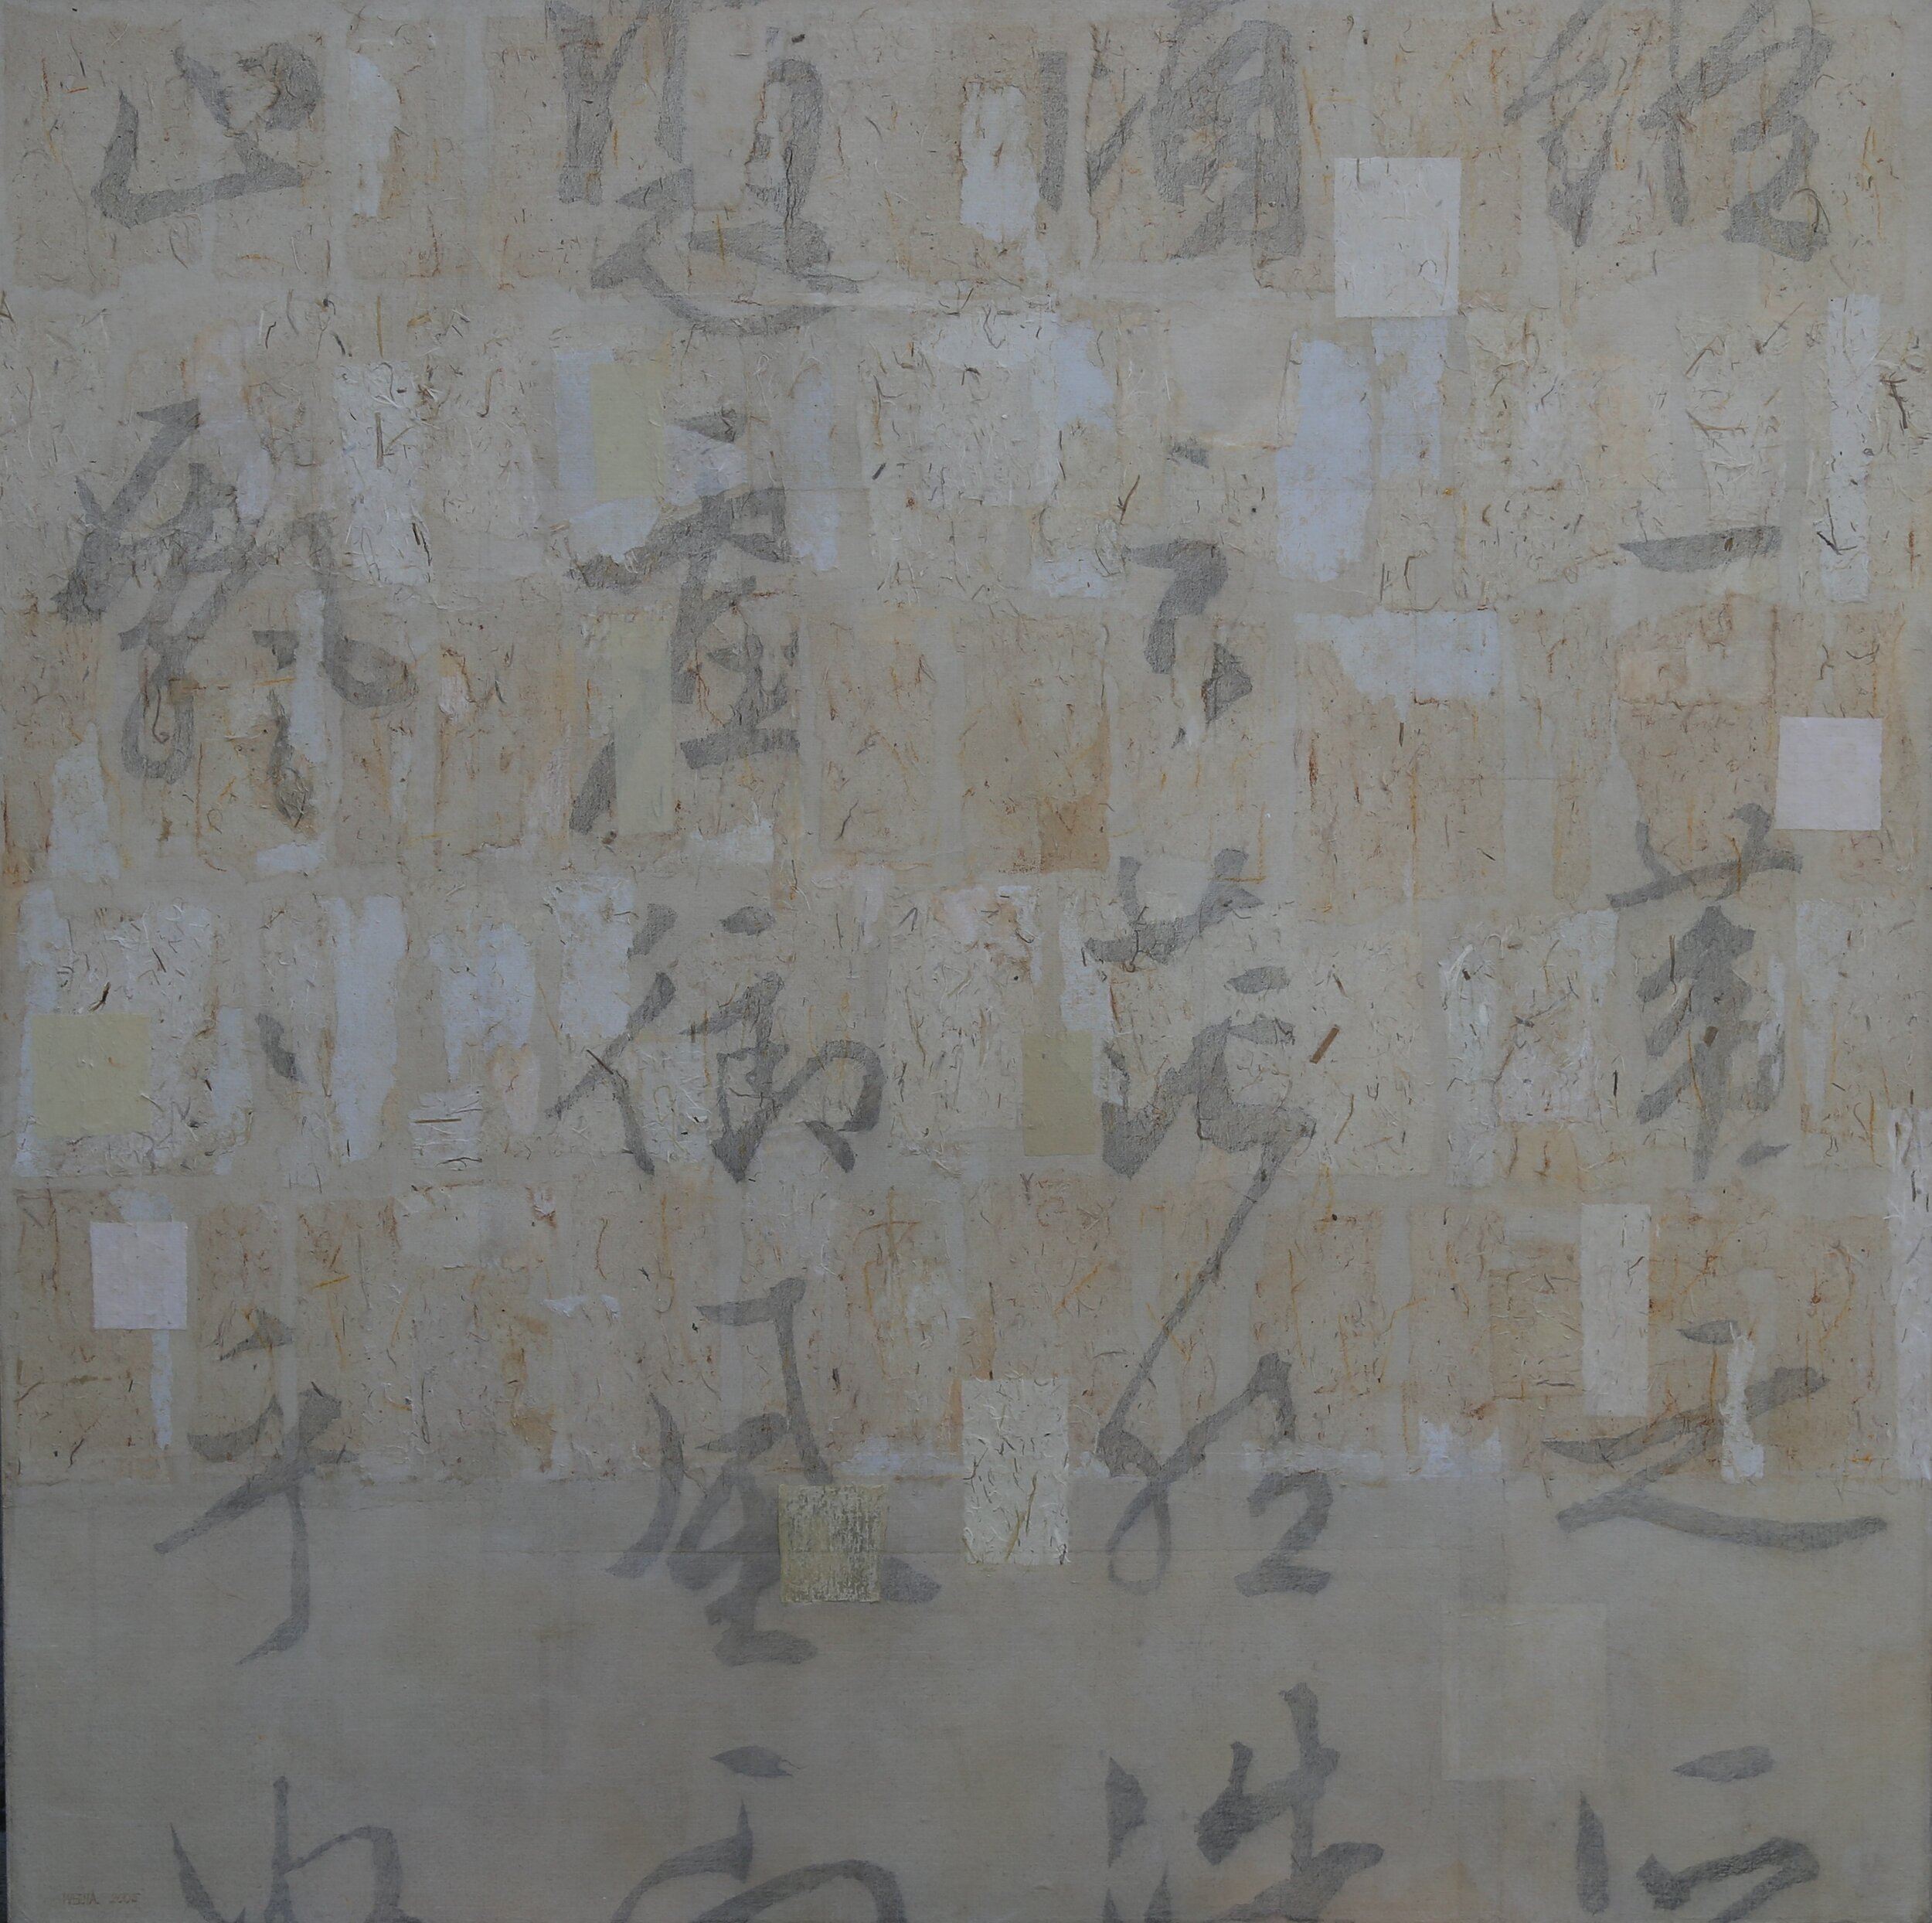  Wei Jia,  No. 44 , 2005. Gouache, graphite, ink, pastel and Xuan paper collage on canvas, 52 x 52 inches ©Wei Jia, courtesy Fou Gallery   